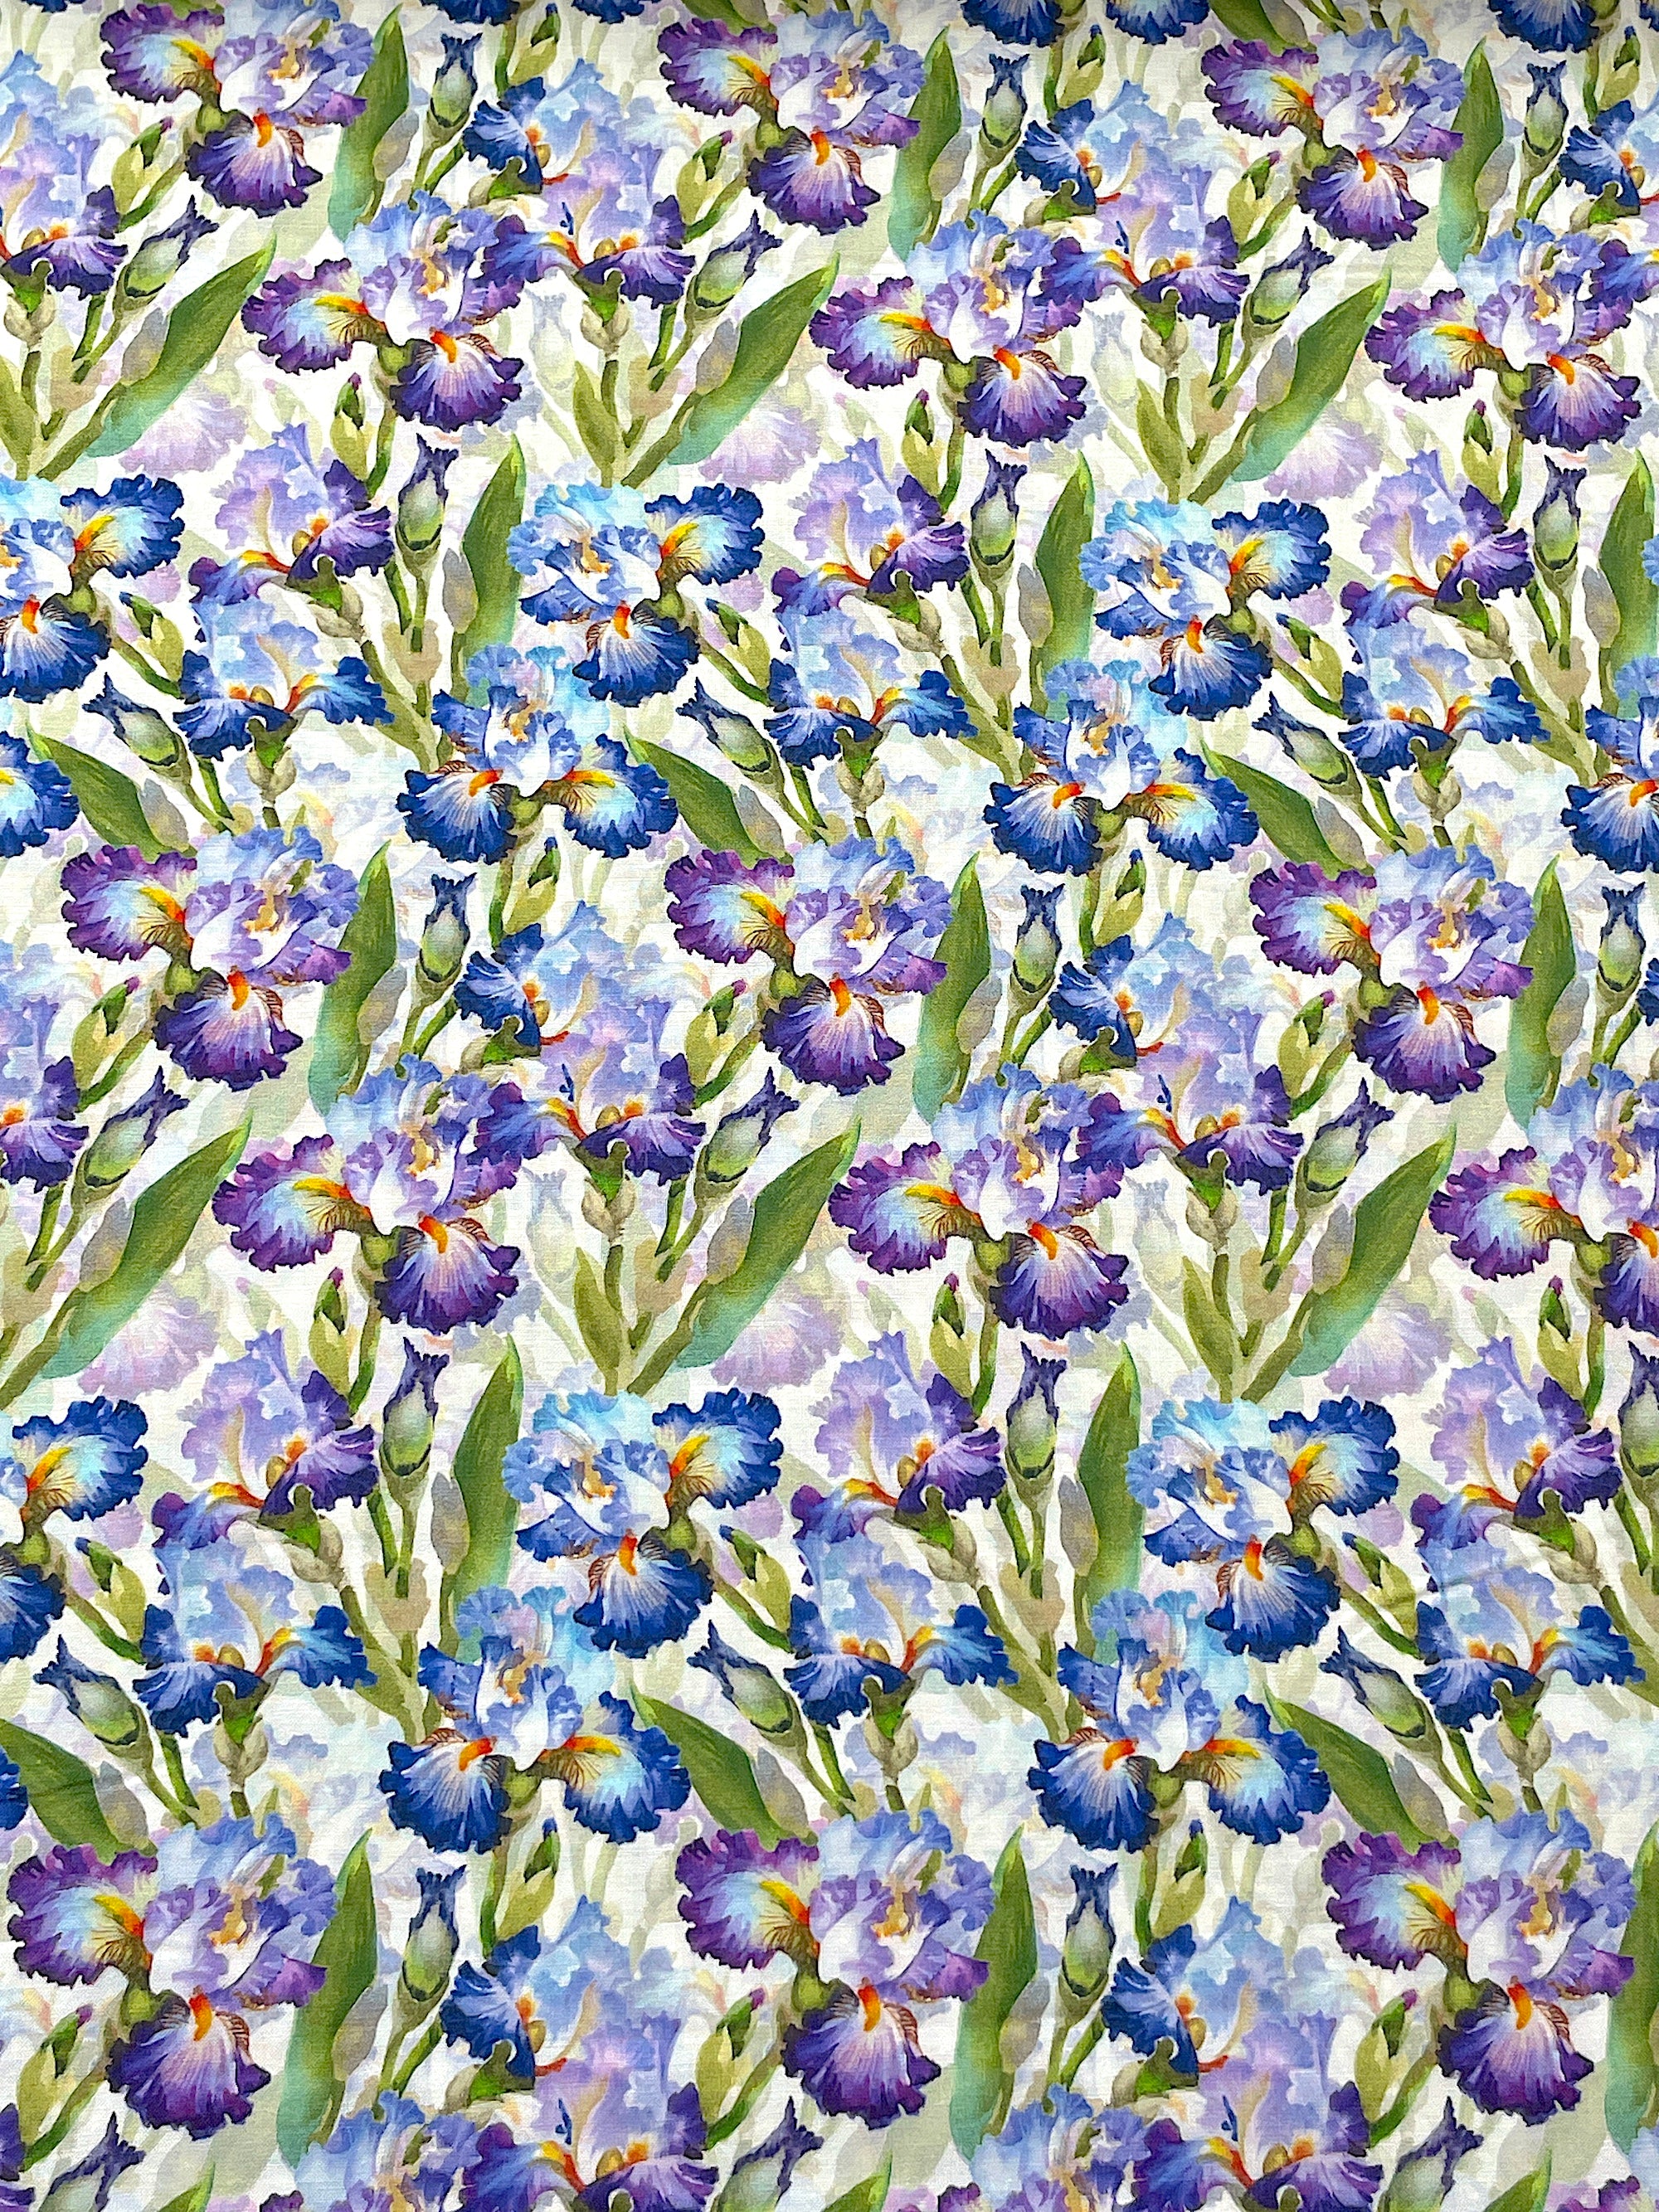 This white fabric is part of the Decoupage collection.&nbsp; This cotton fabric is covered with purple and blue iris flowers.